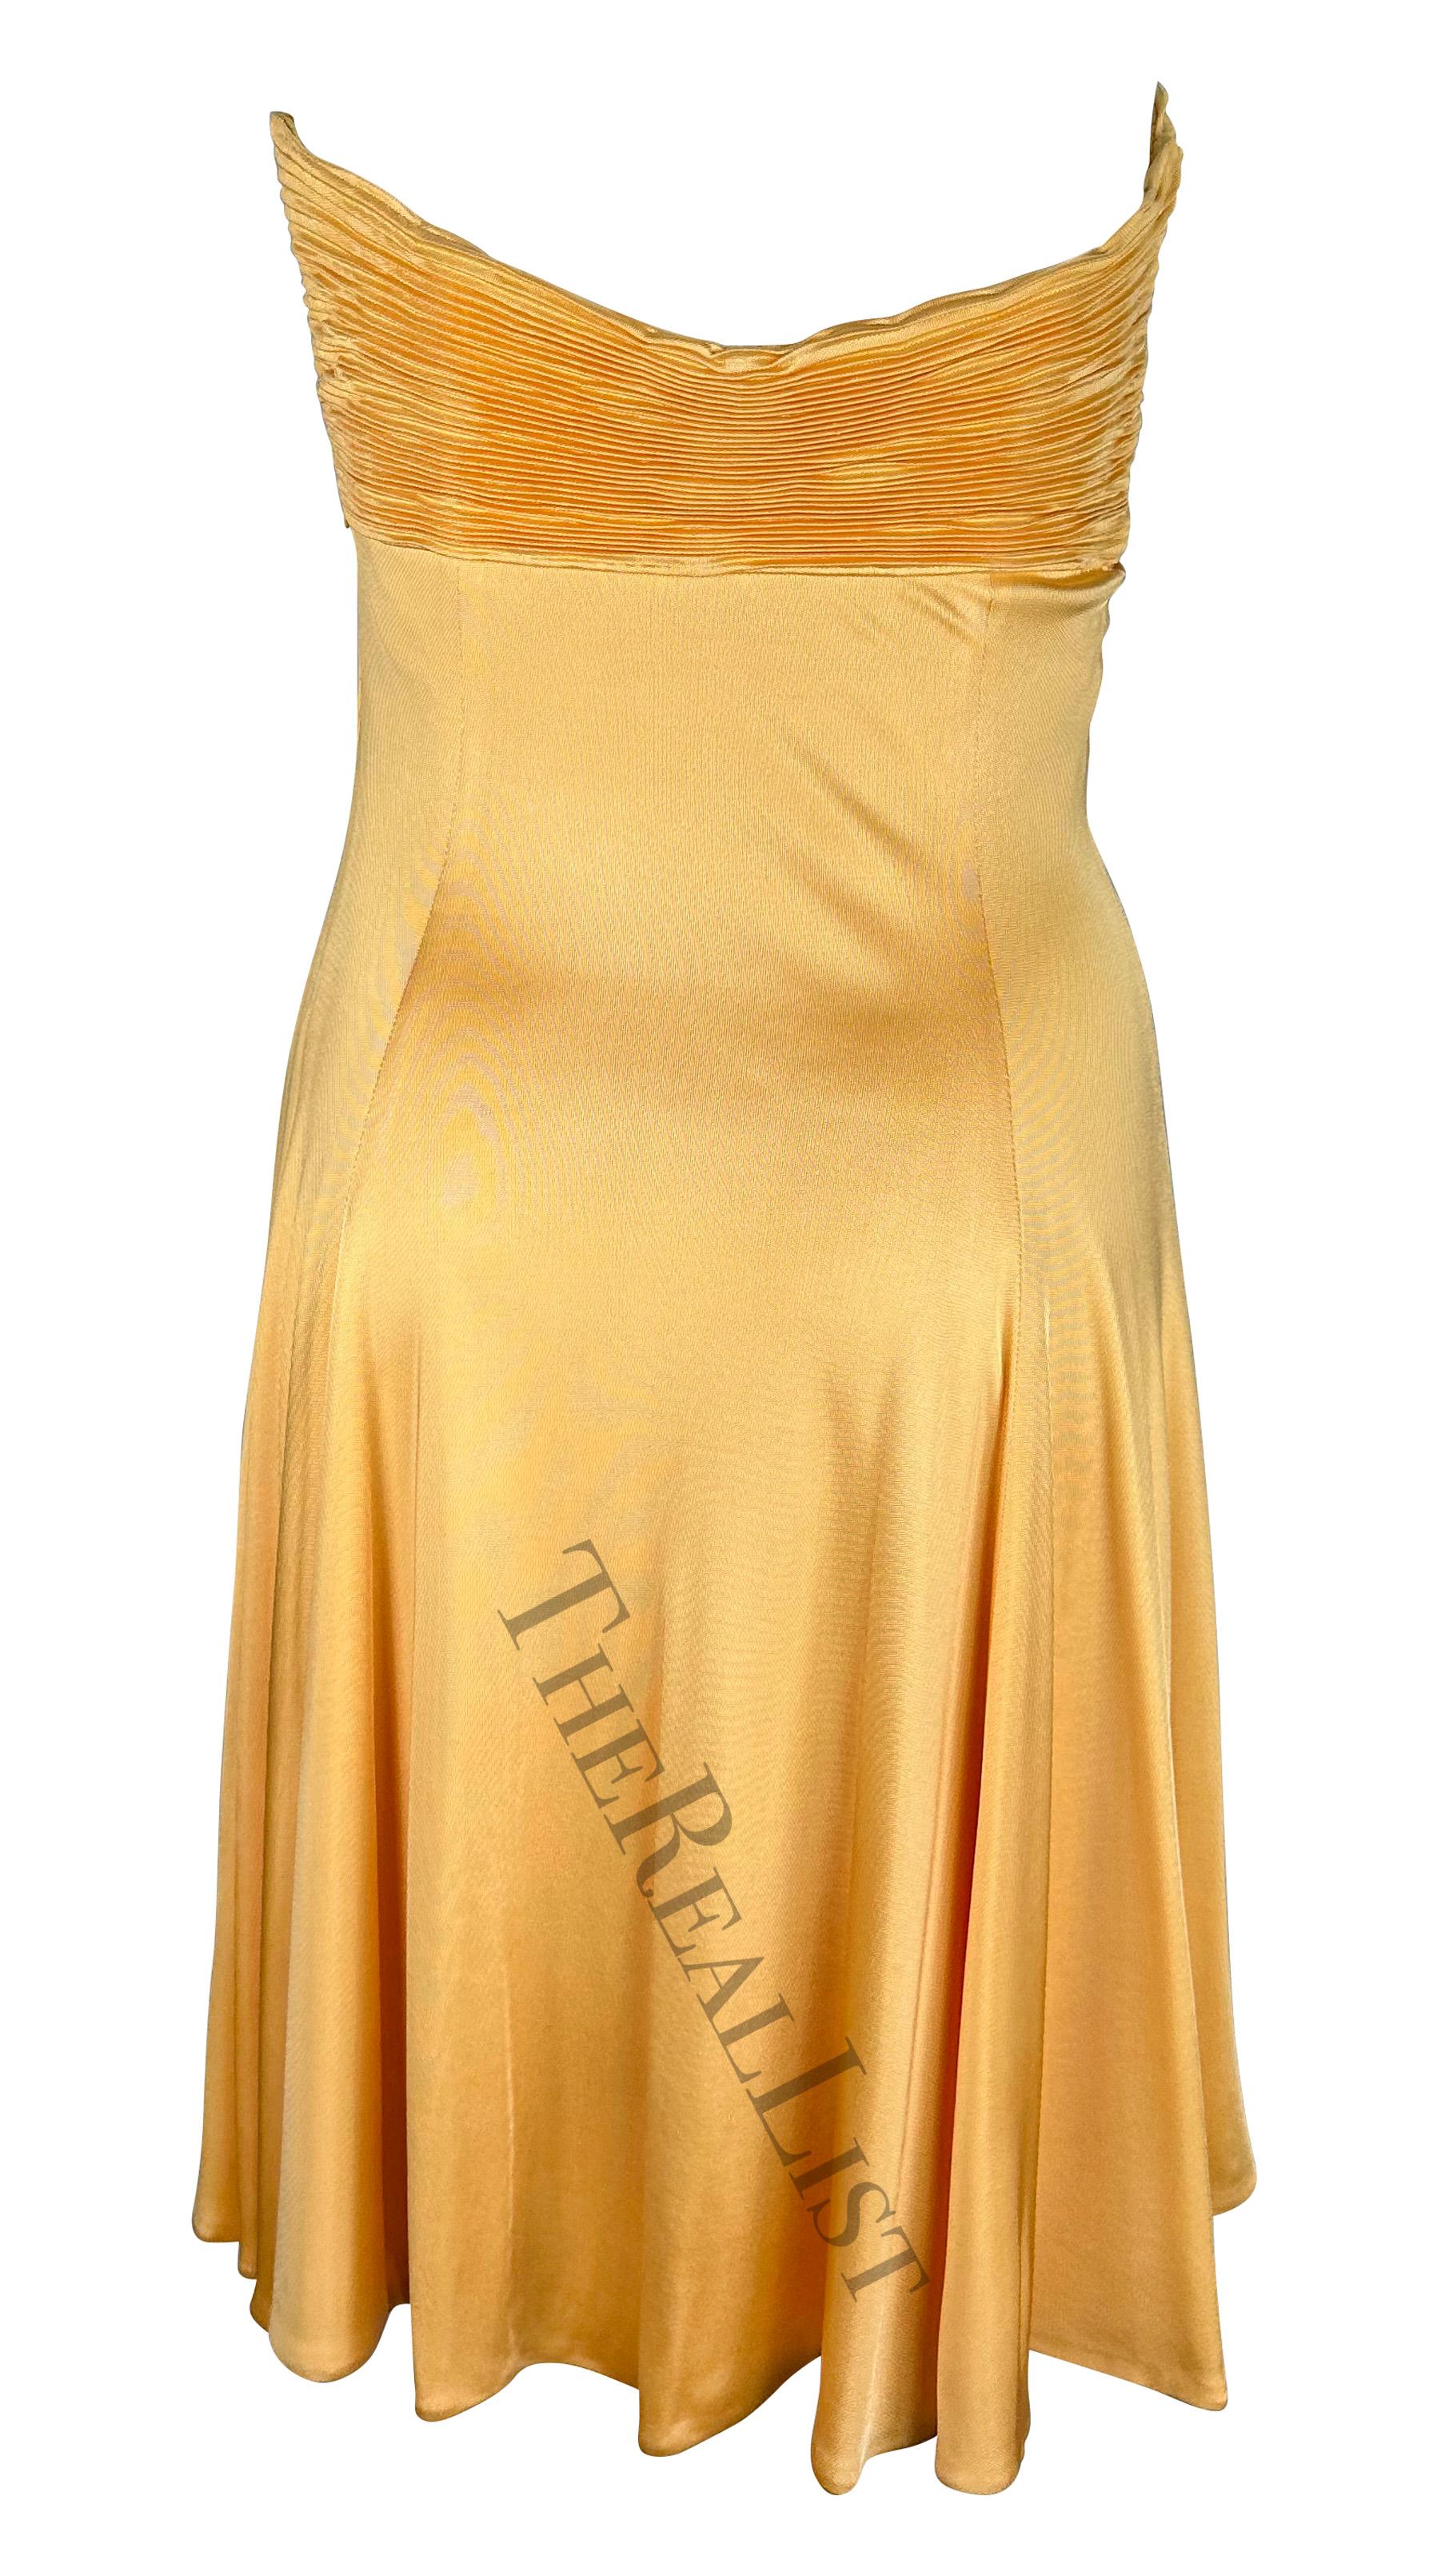 Women's S/S 1995 Gianni Versace Couture Light Orange Yellow Flare Strapless Dress For Sale